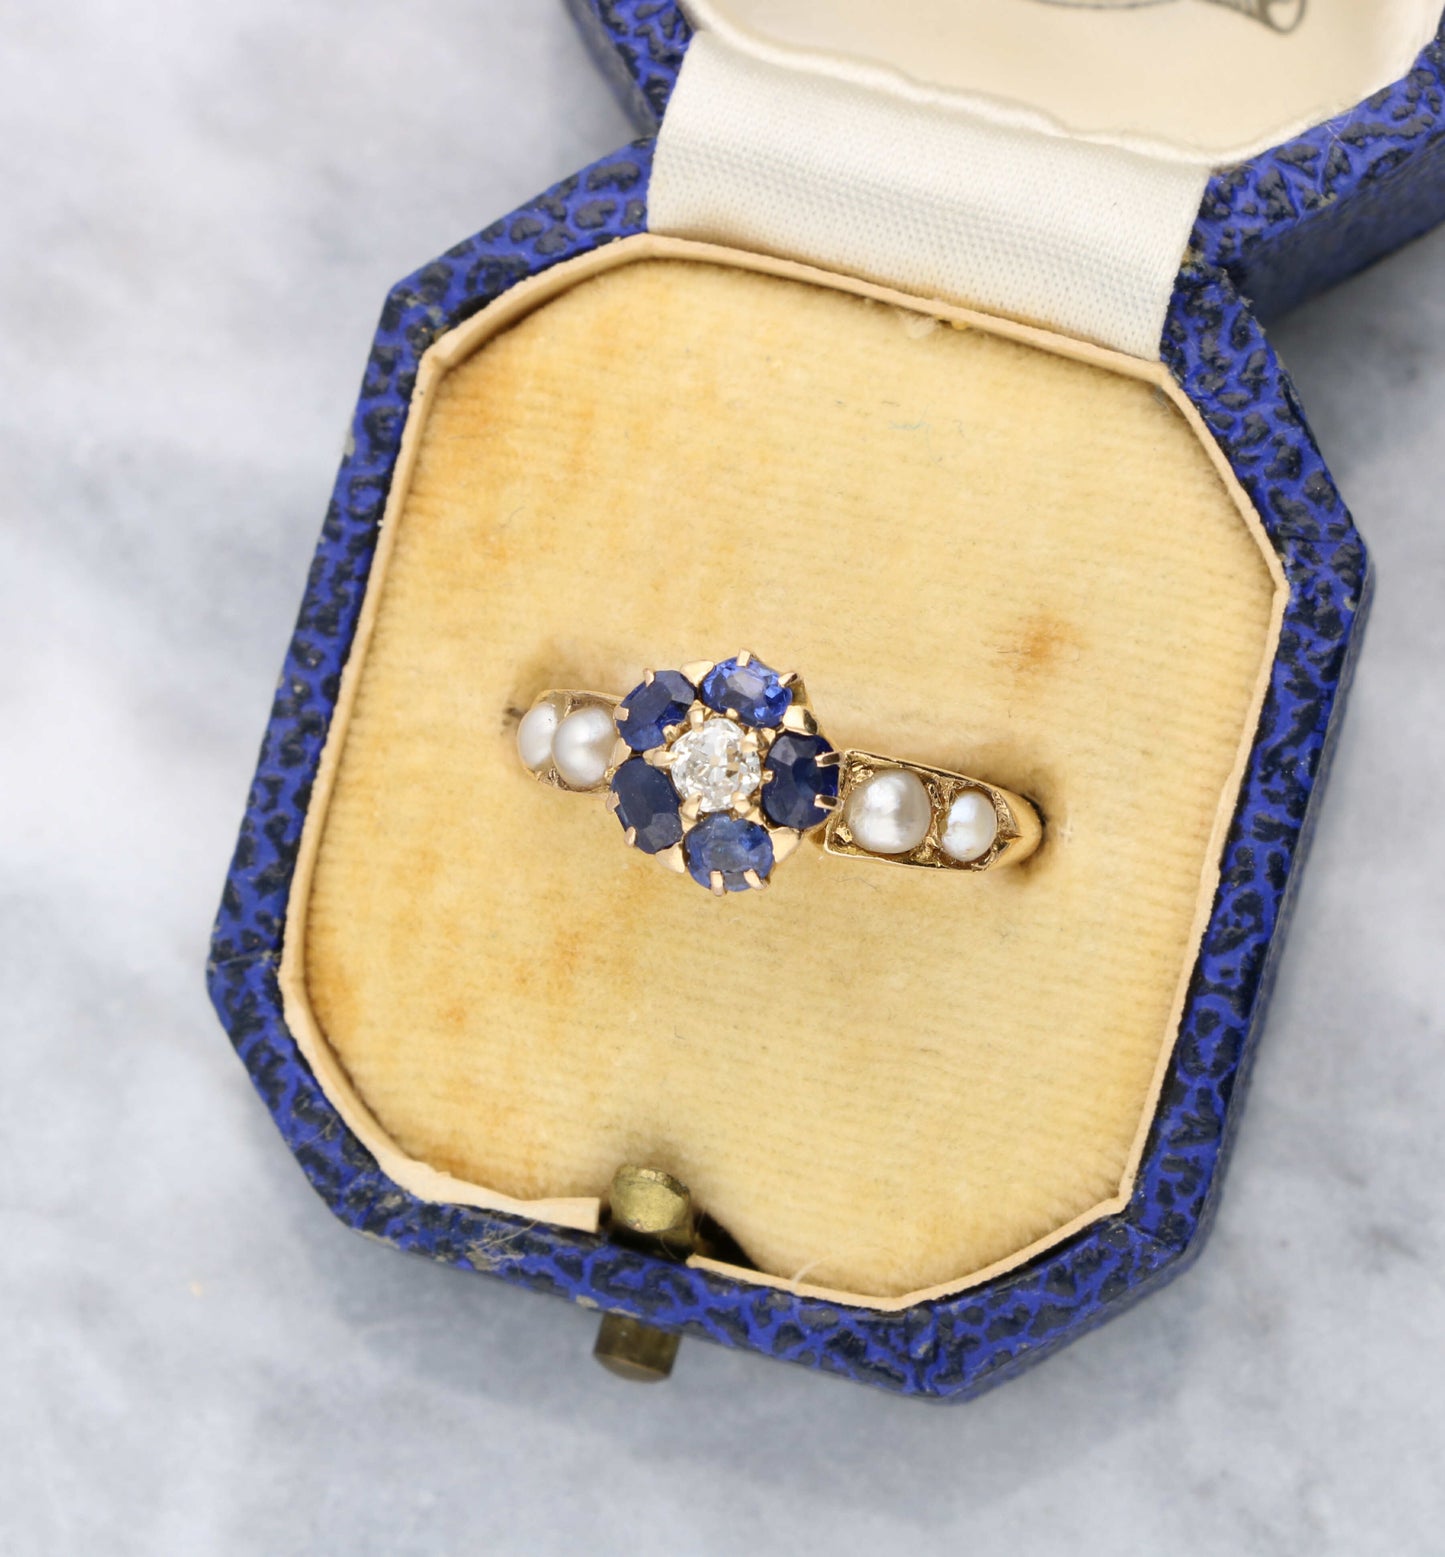 Old cut diamond, sapphire and pearl cluster ring